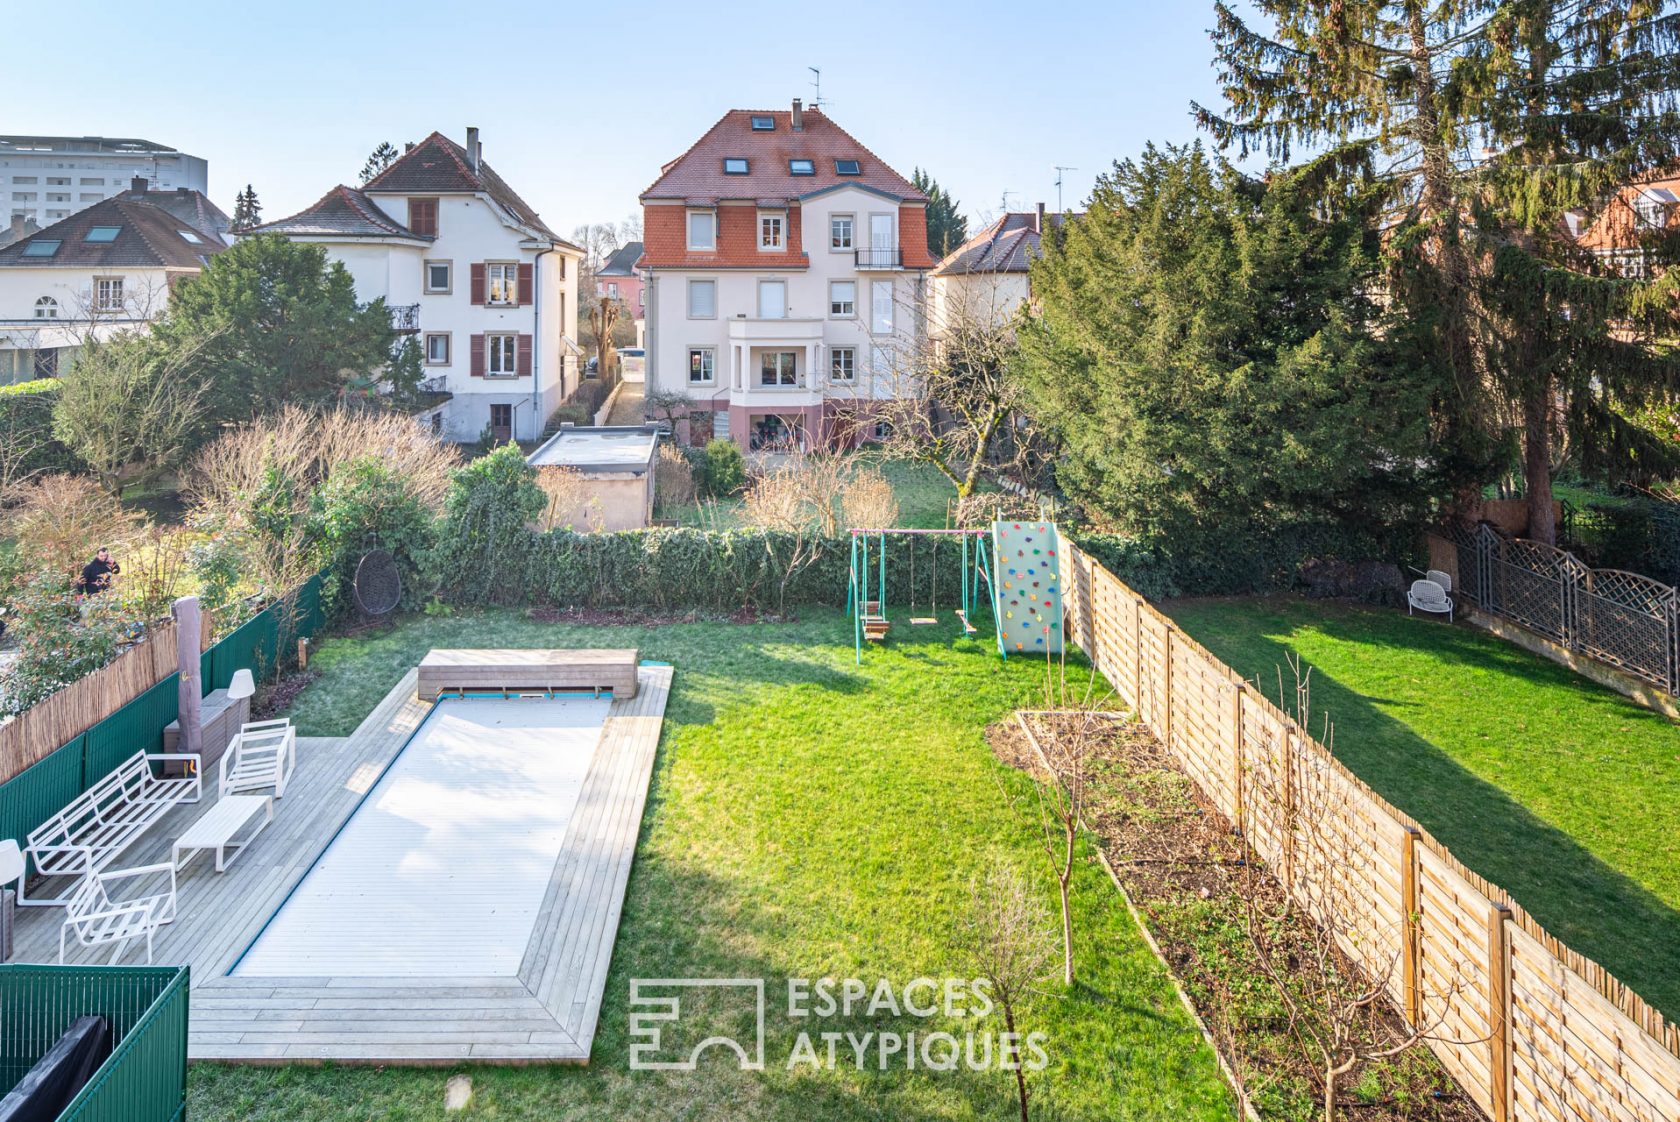 Bourgeois flat and its garden with swimming pool